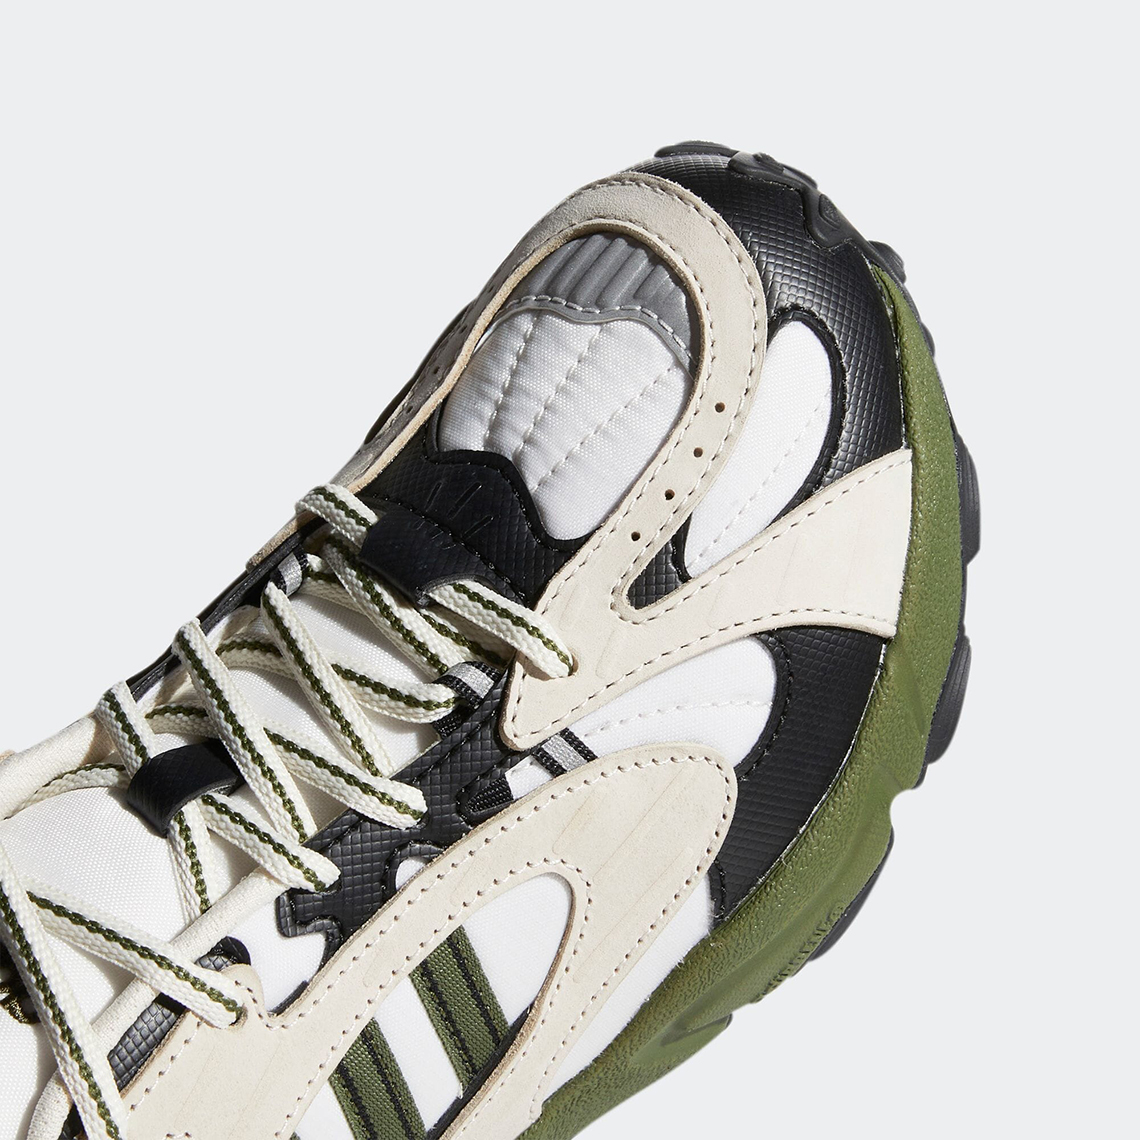 Adidas Ivy Park Savage Gw1523 Release Date 4